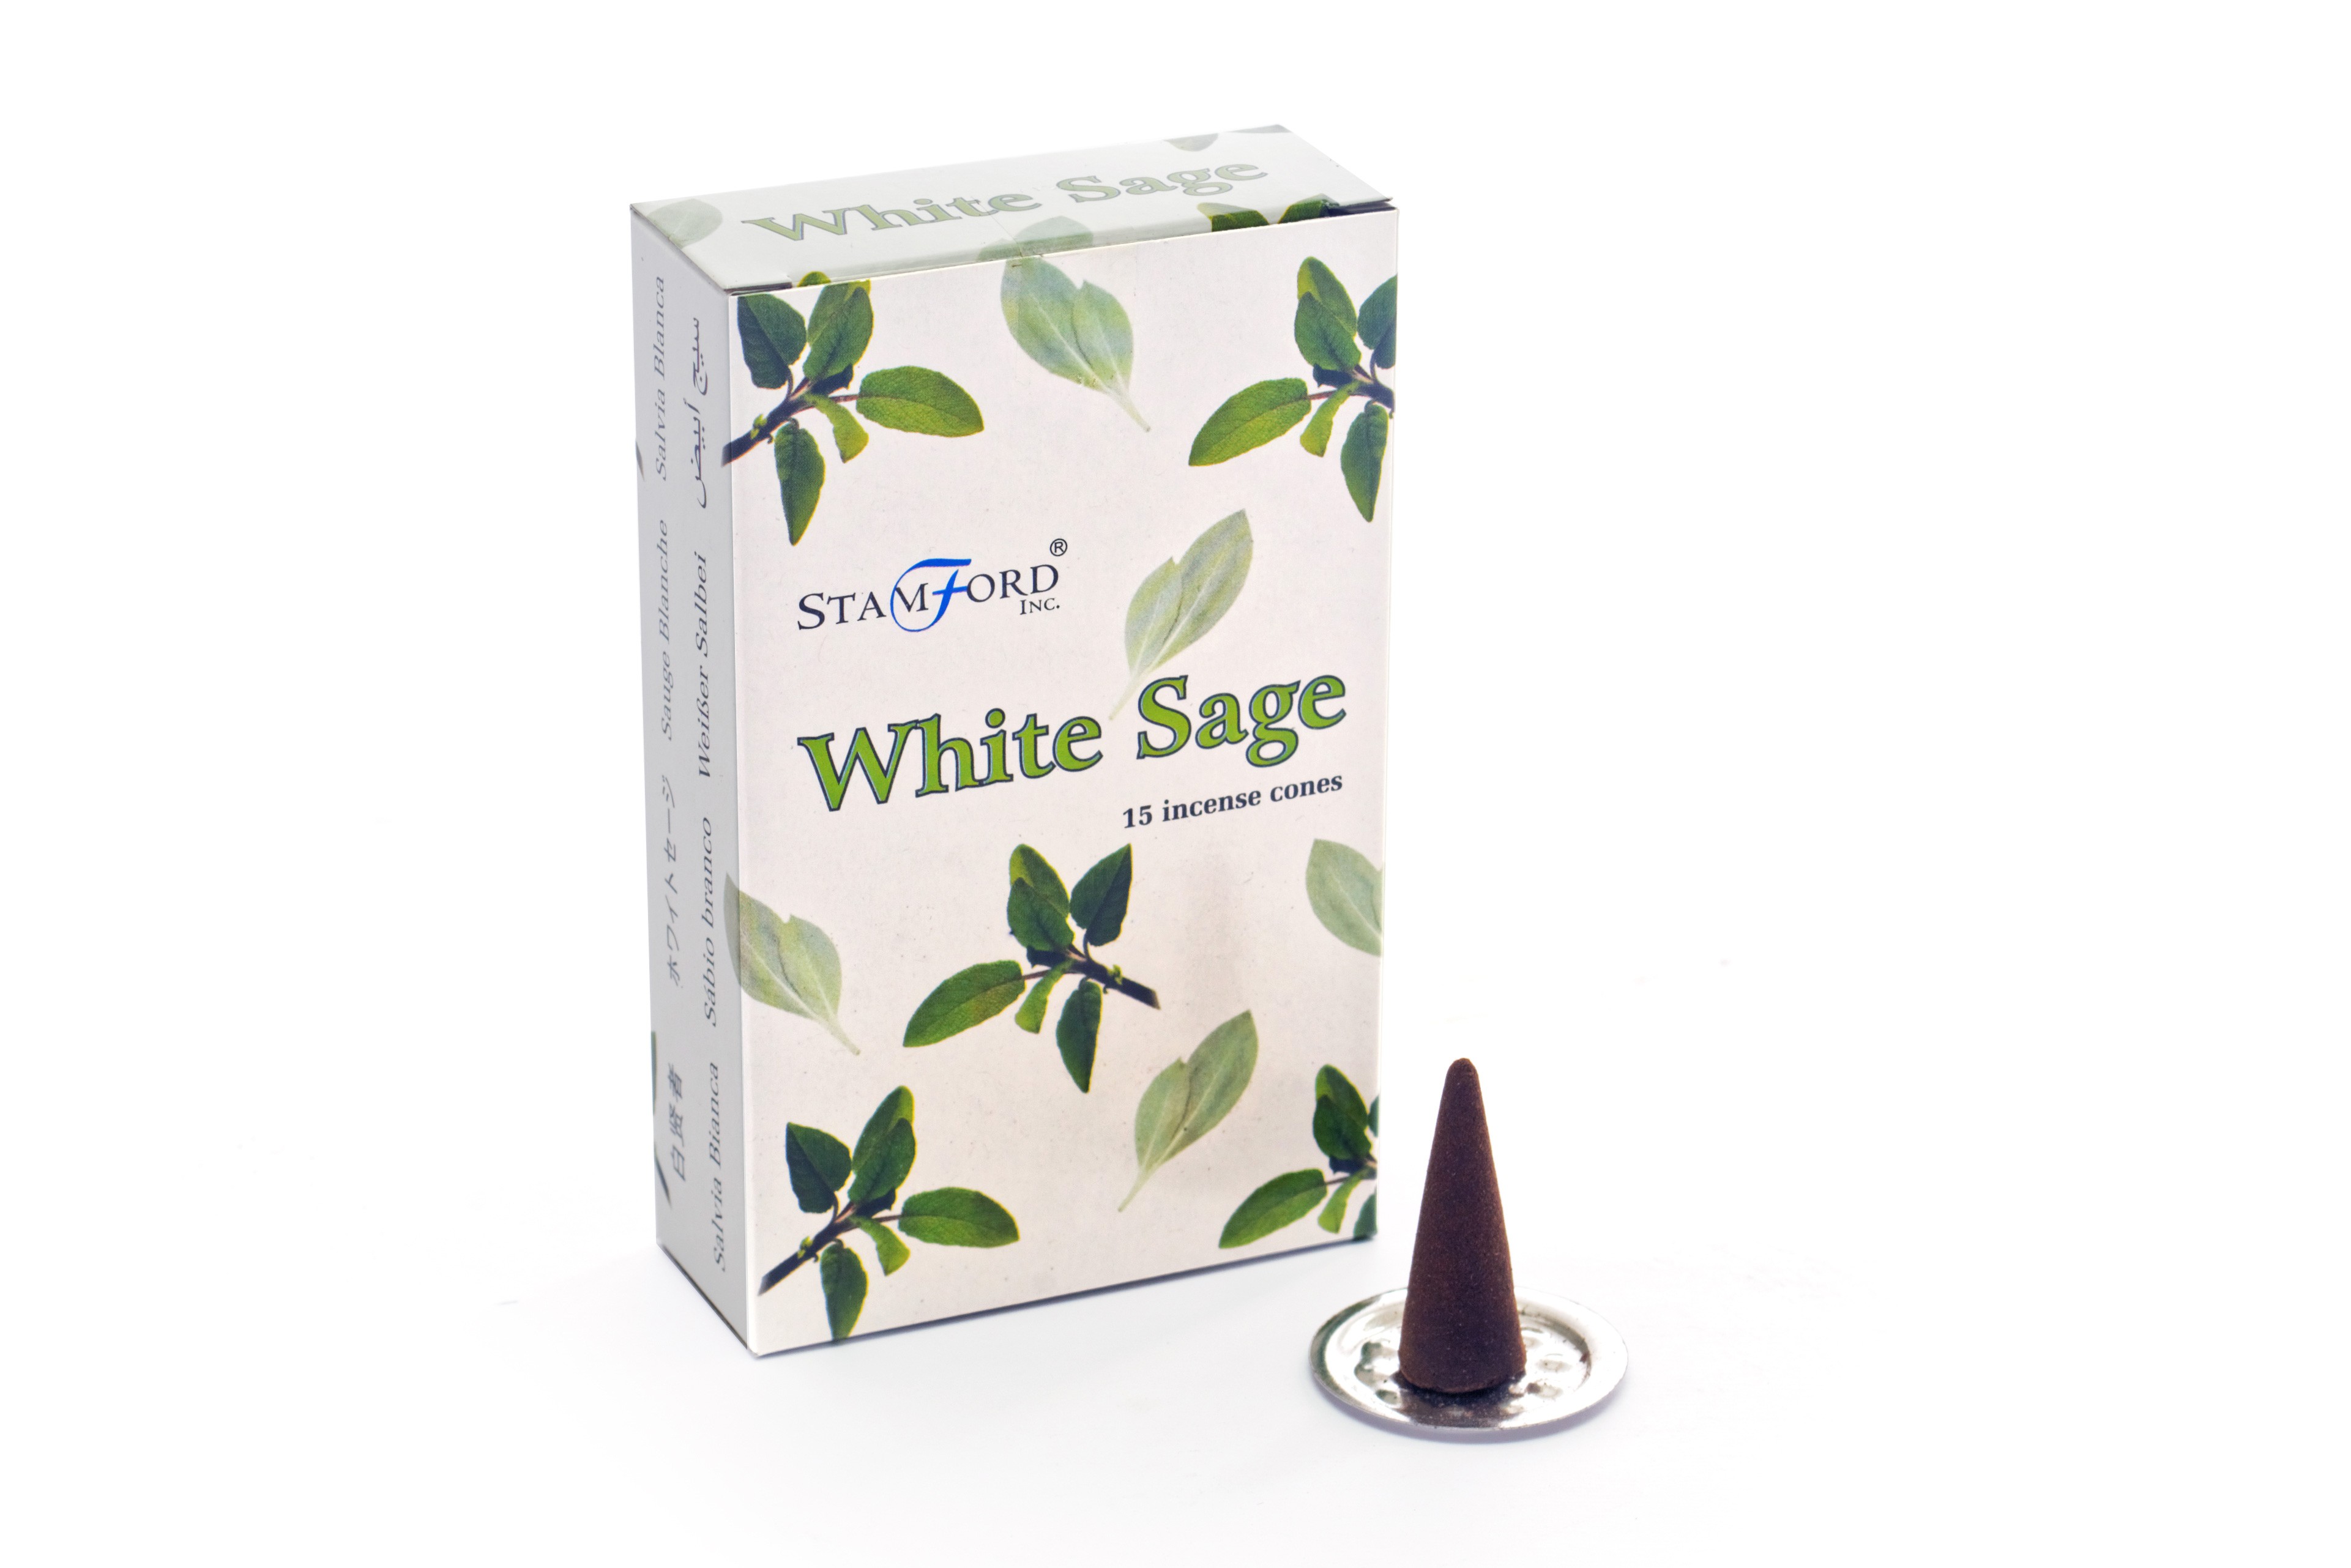 White Sage Stamford Incense Cones and Metal Holder